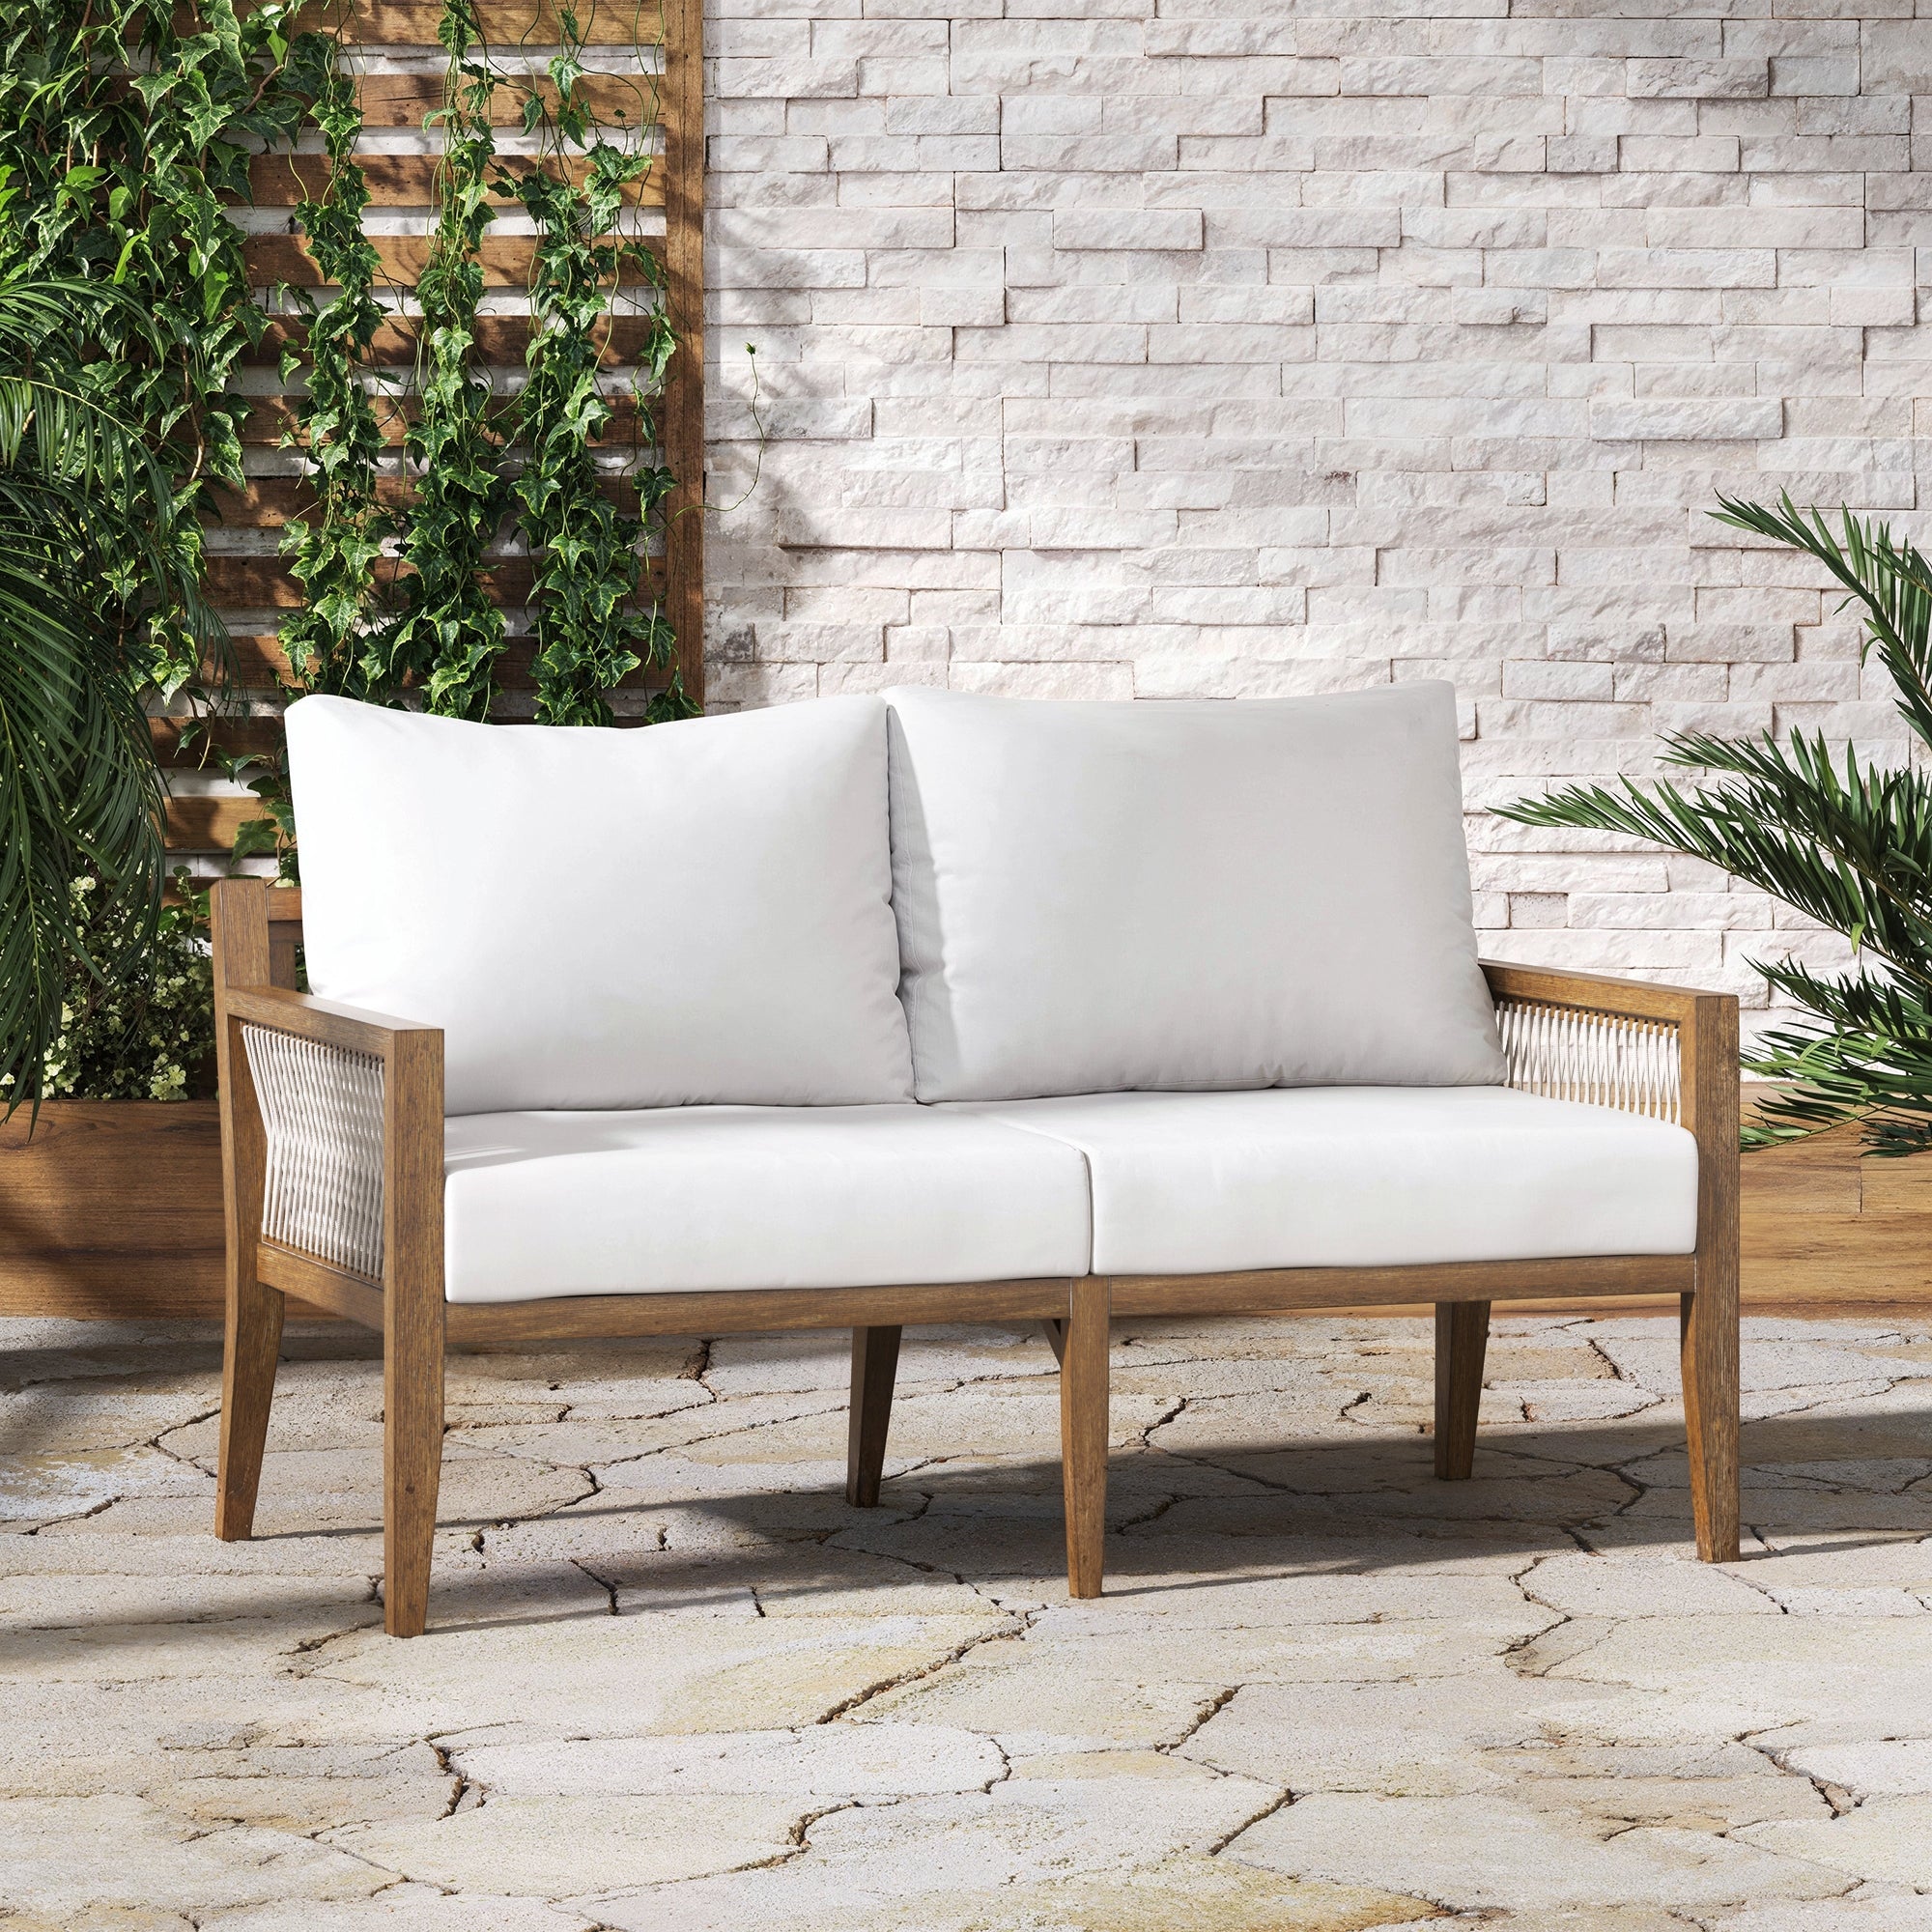 Outdoor Wood Patio Couch White Light Brown